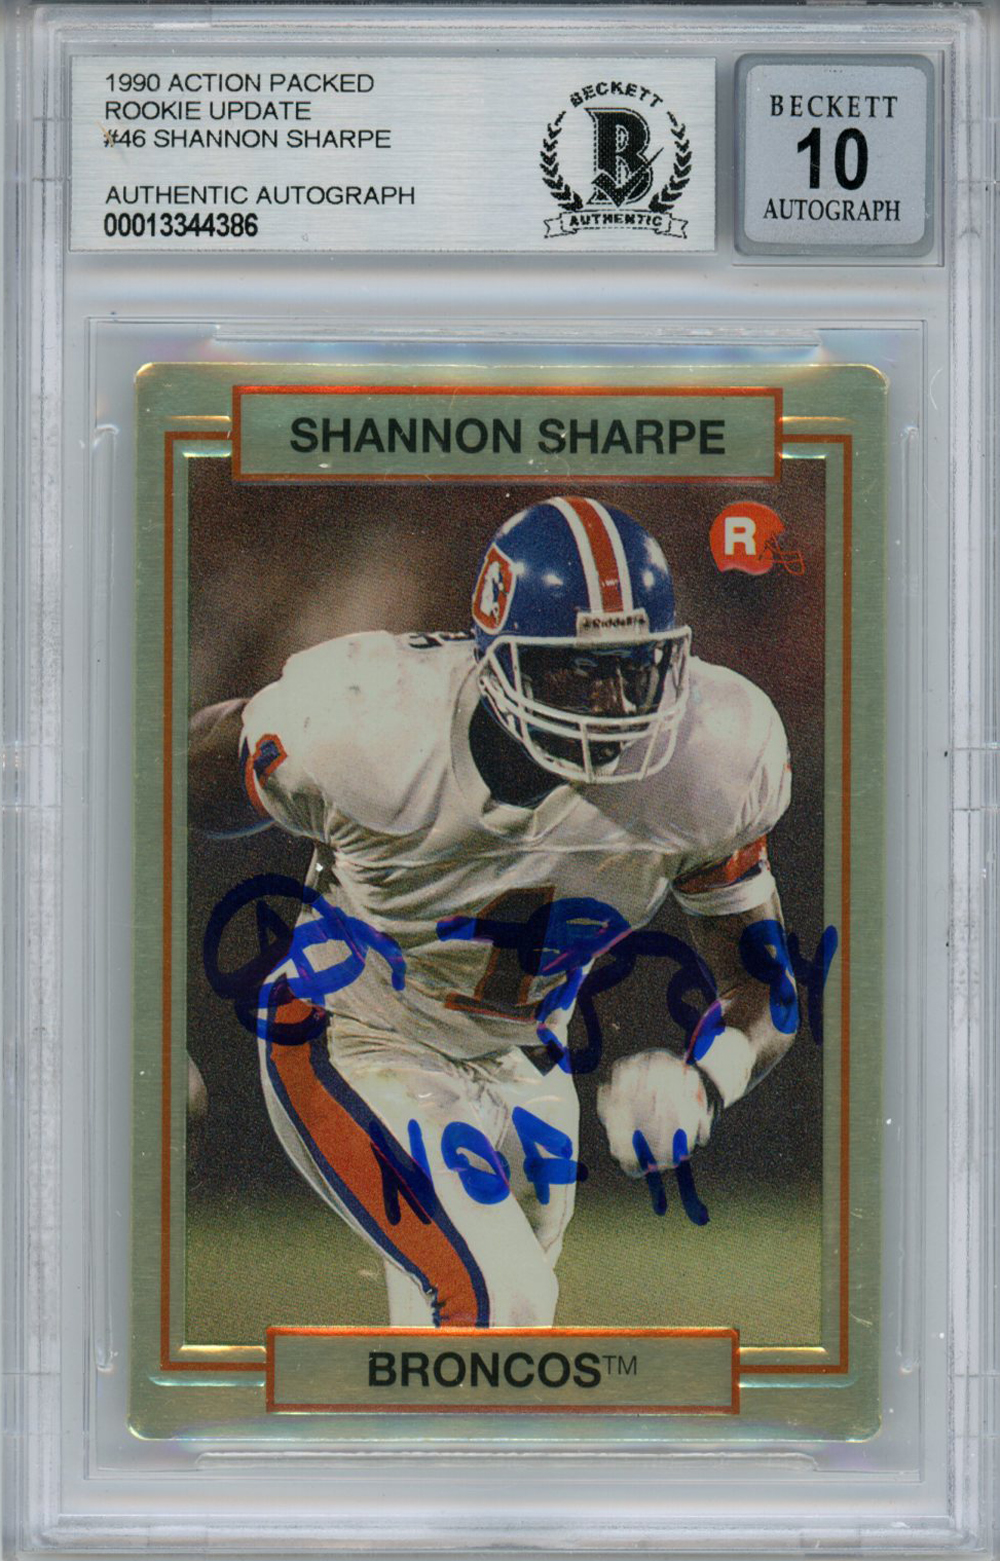 Shannon Sharpe Signed 1990 Action Packed Rookie Card HOF BAS 10 Slab